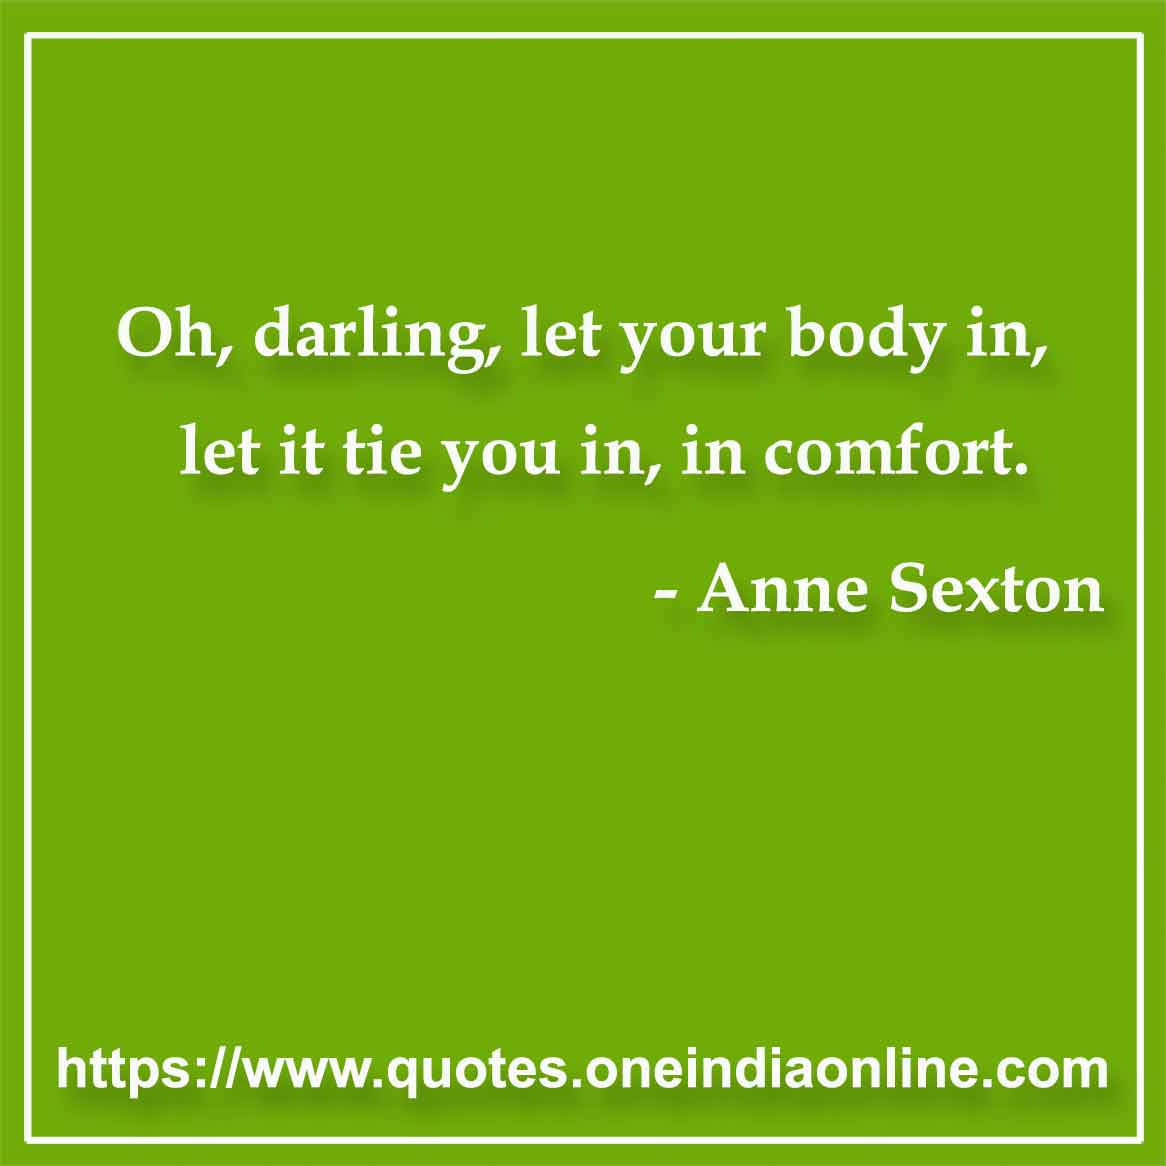 Oh, darling, let your body in, let it tie you in, in comfort.

- Body Quote by Anne Sexton